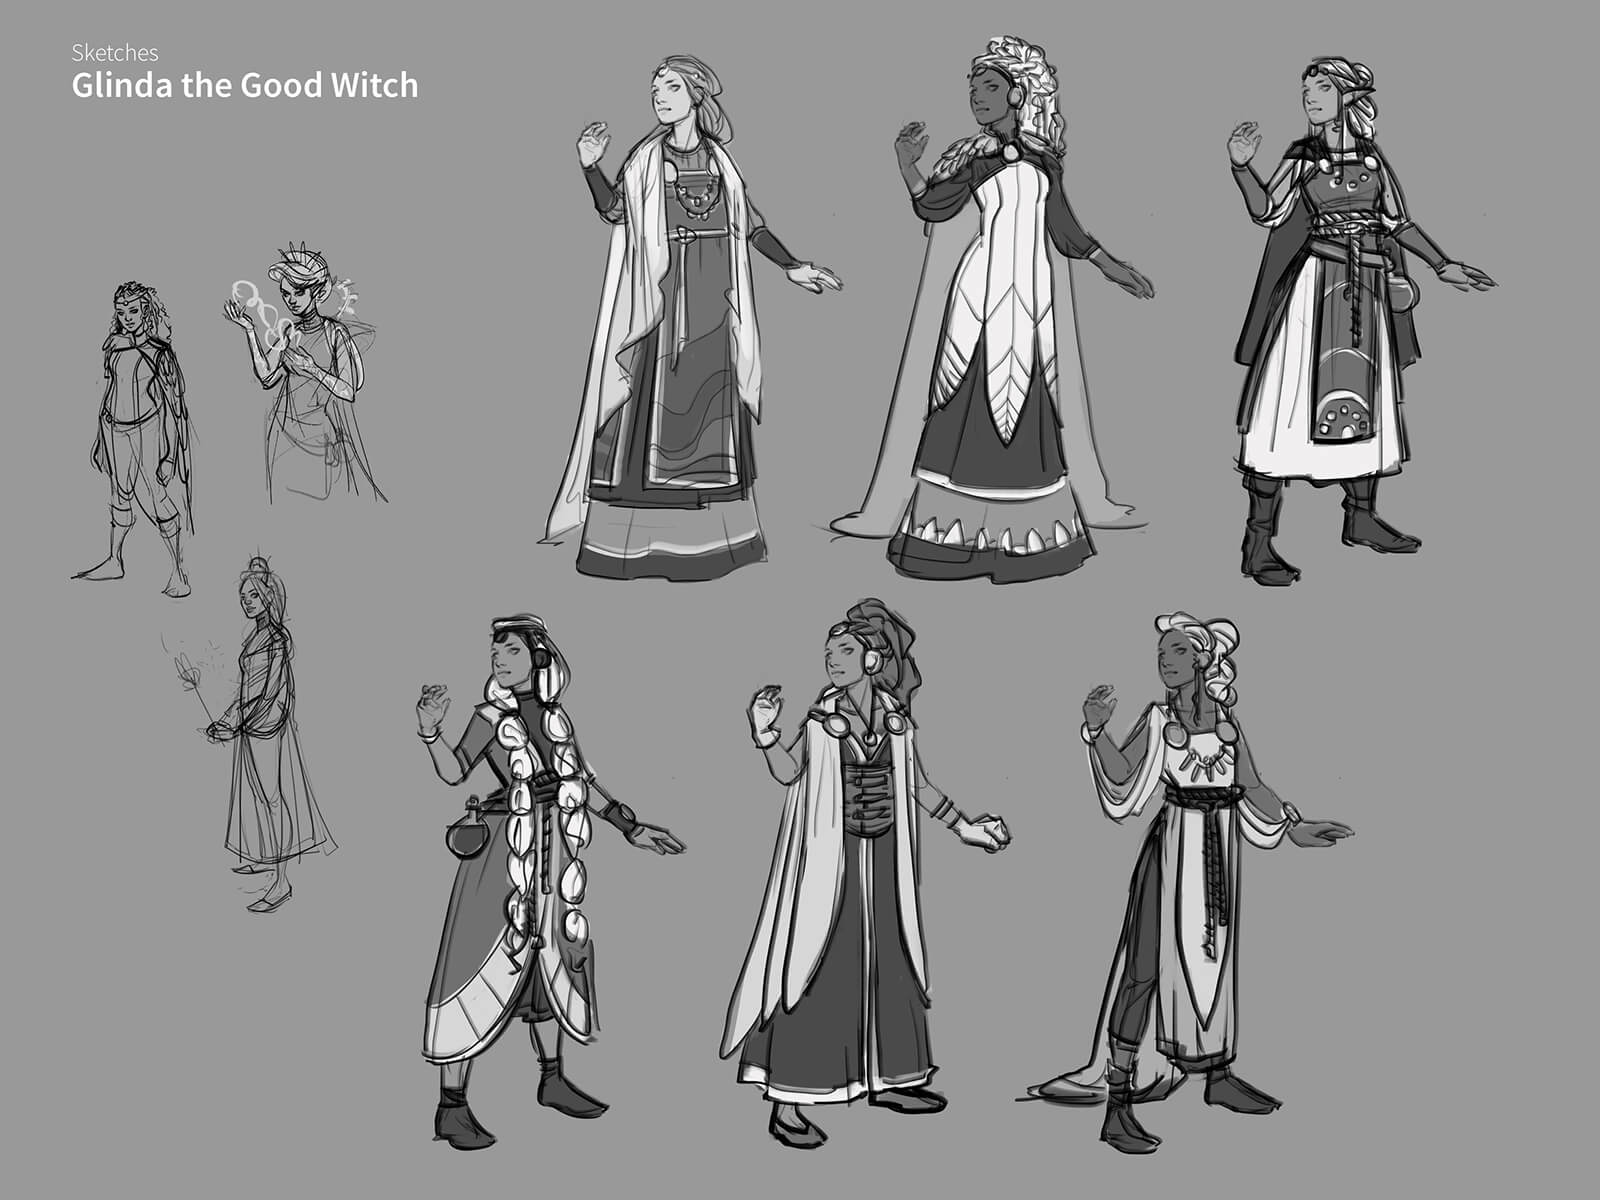 A character named Glinda the Good Witch in various costumes